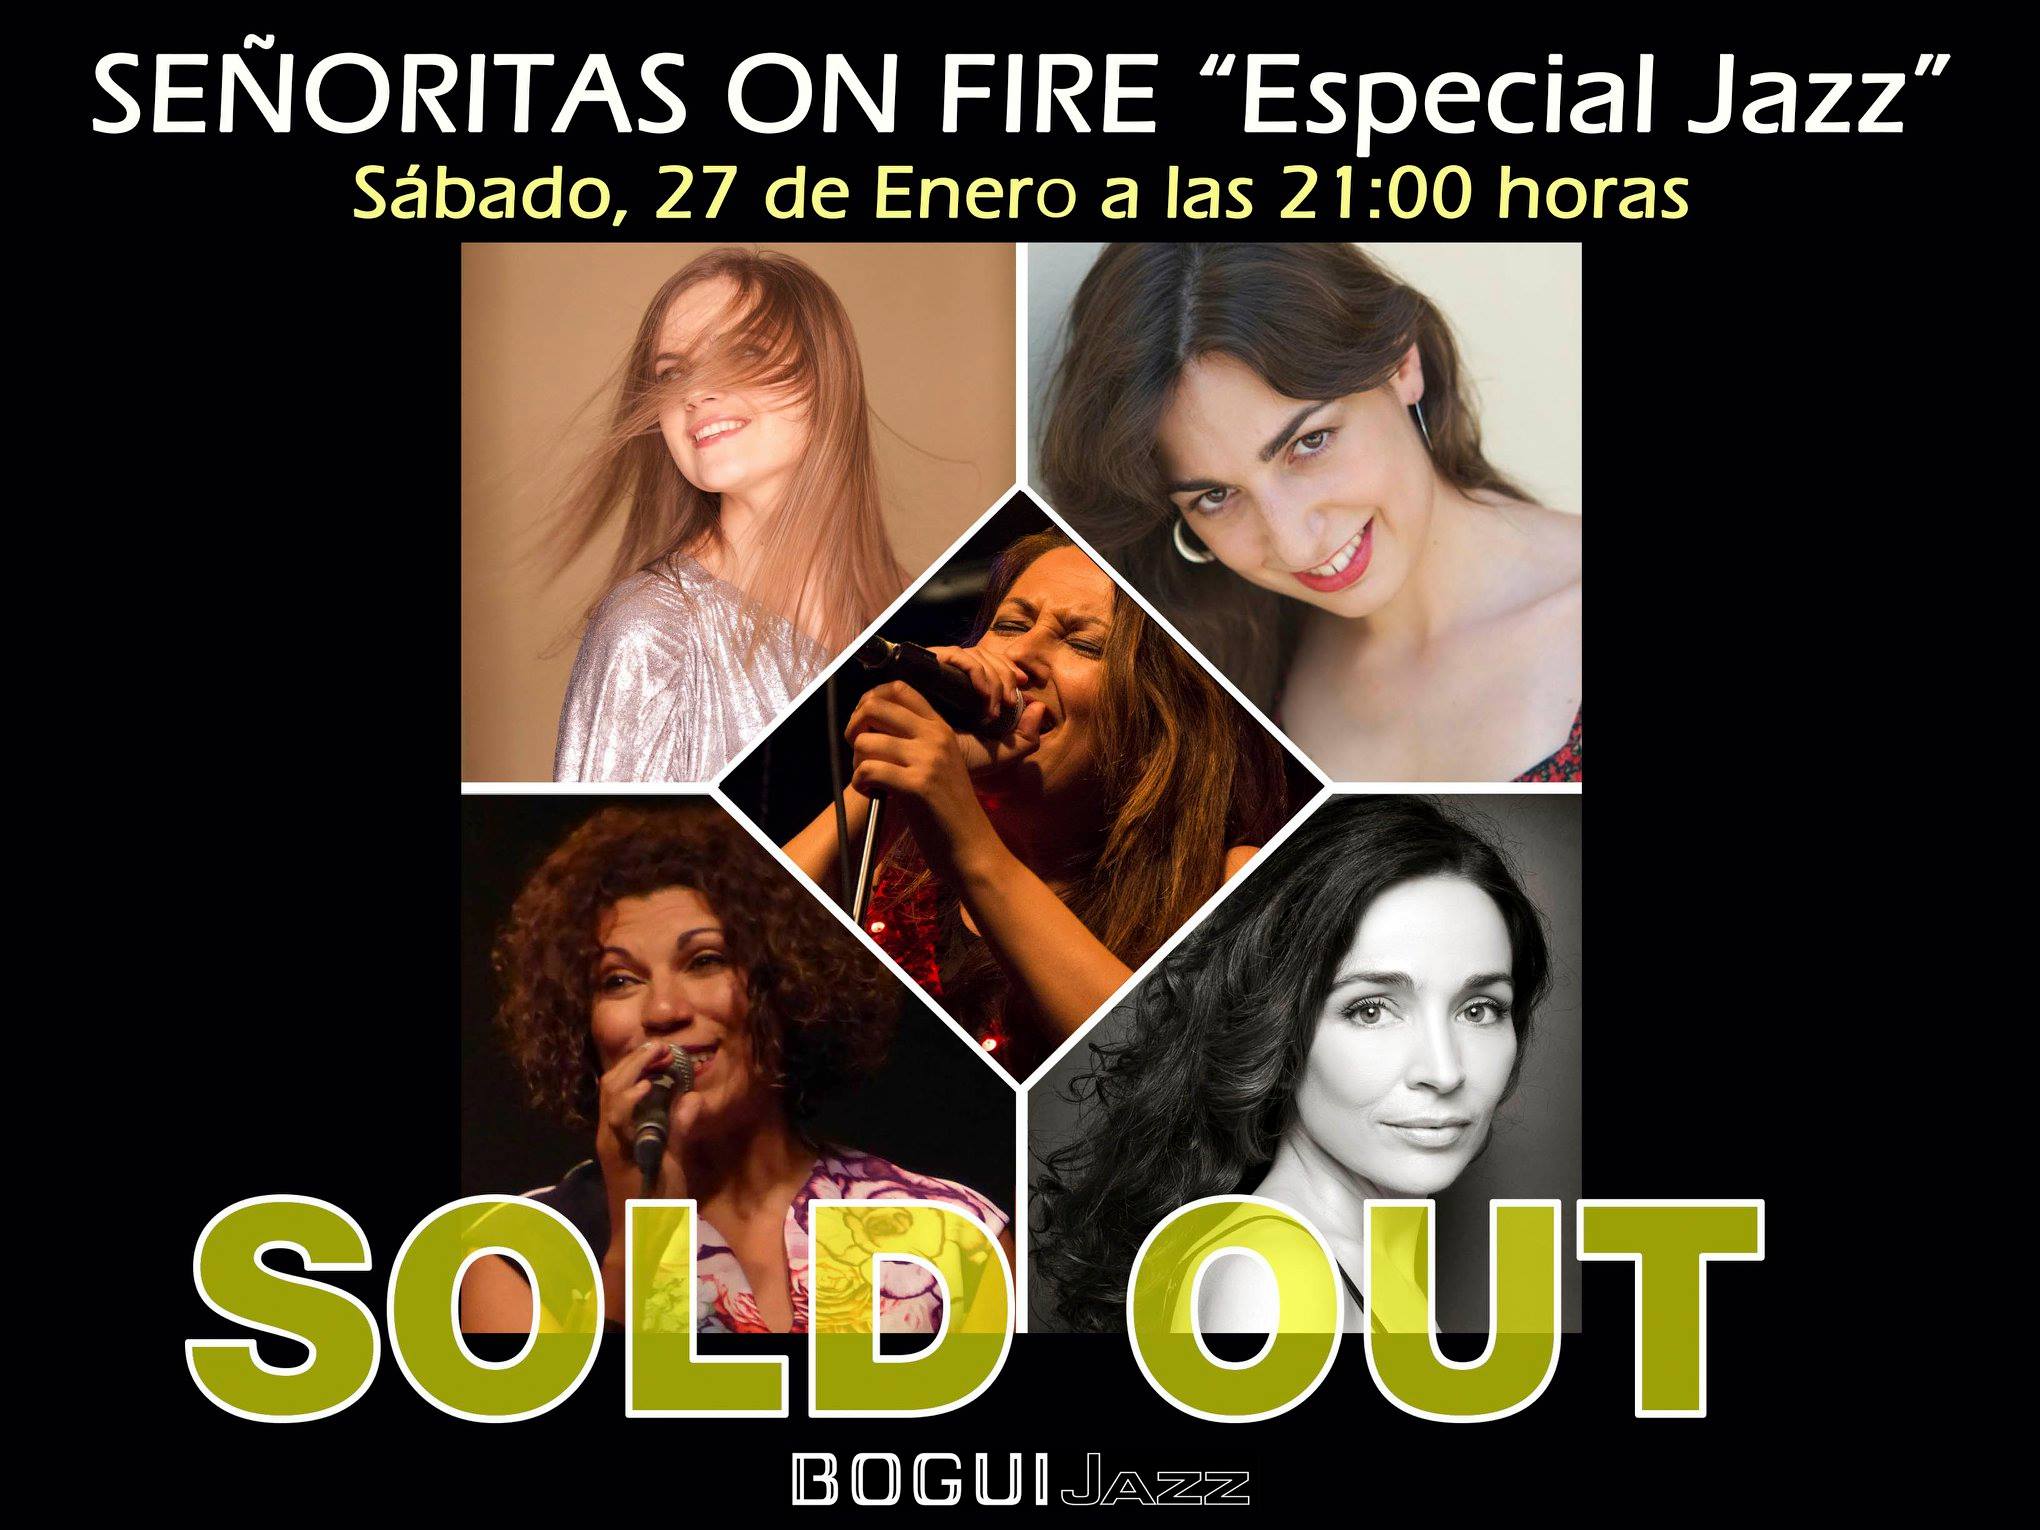 Especial Jazz Sold Out.jpg